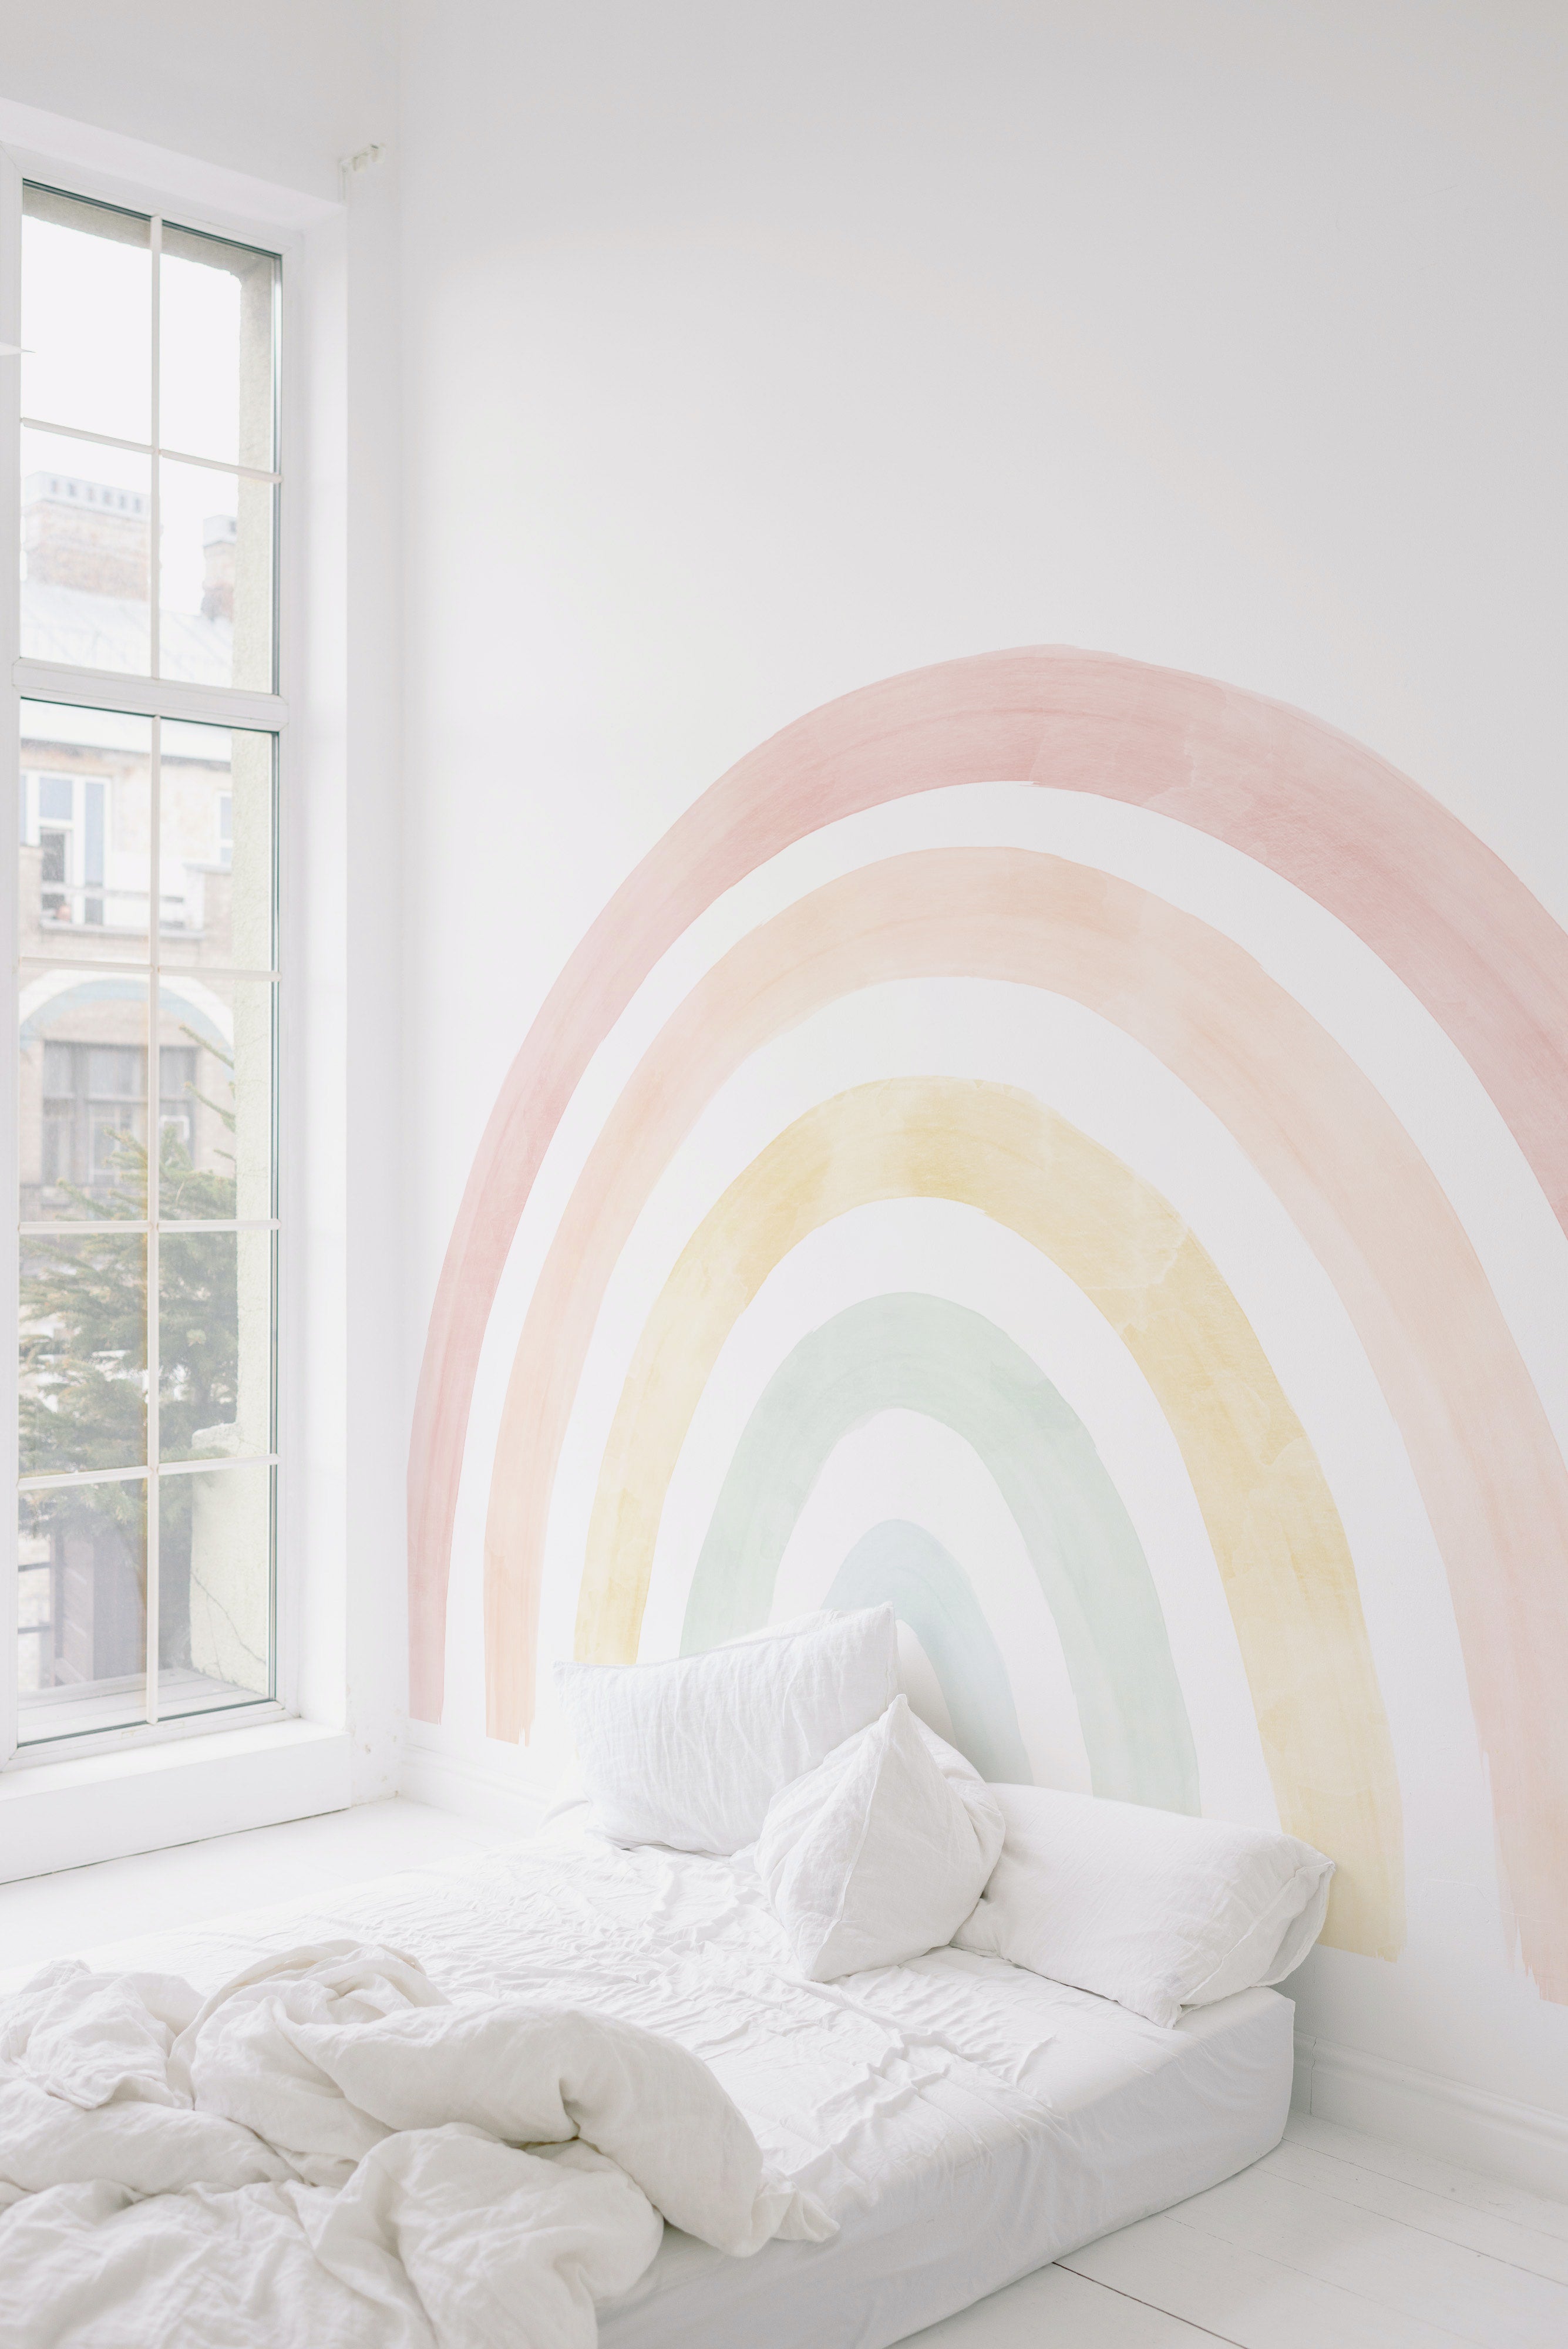 A cozy corner of a room lit by natural light through a large window, with the pastel rainbow mural providing a soothing backdrop to a simple white bed and linens.